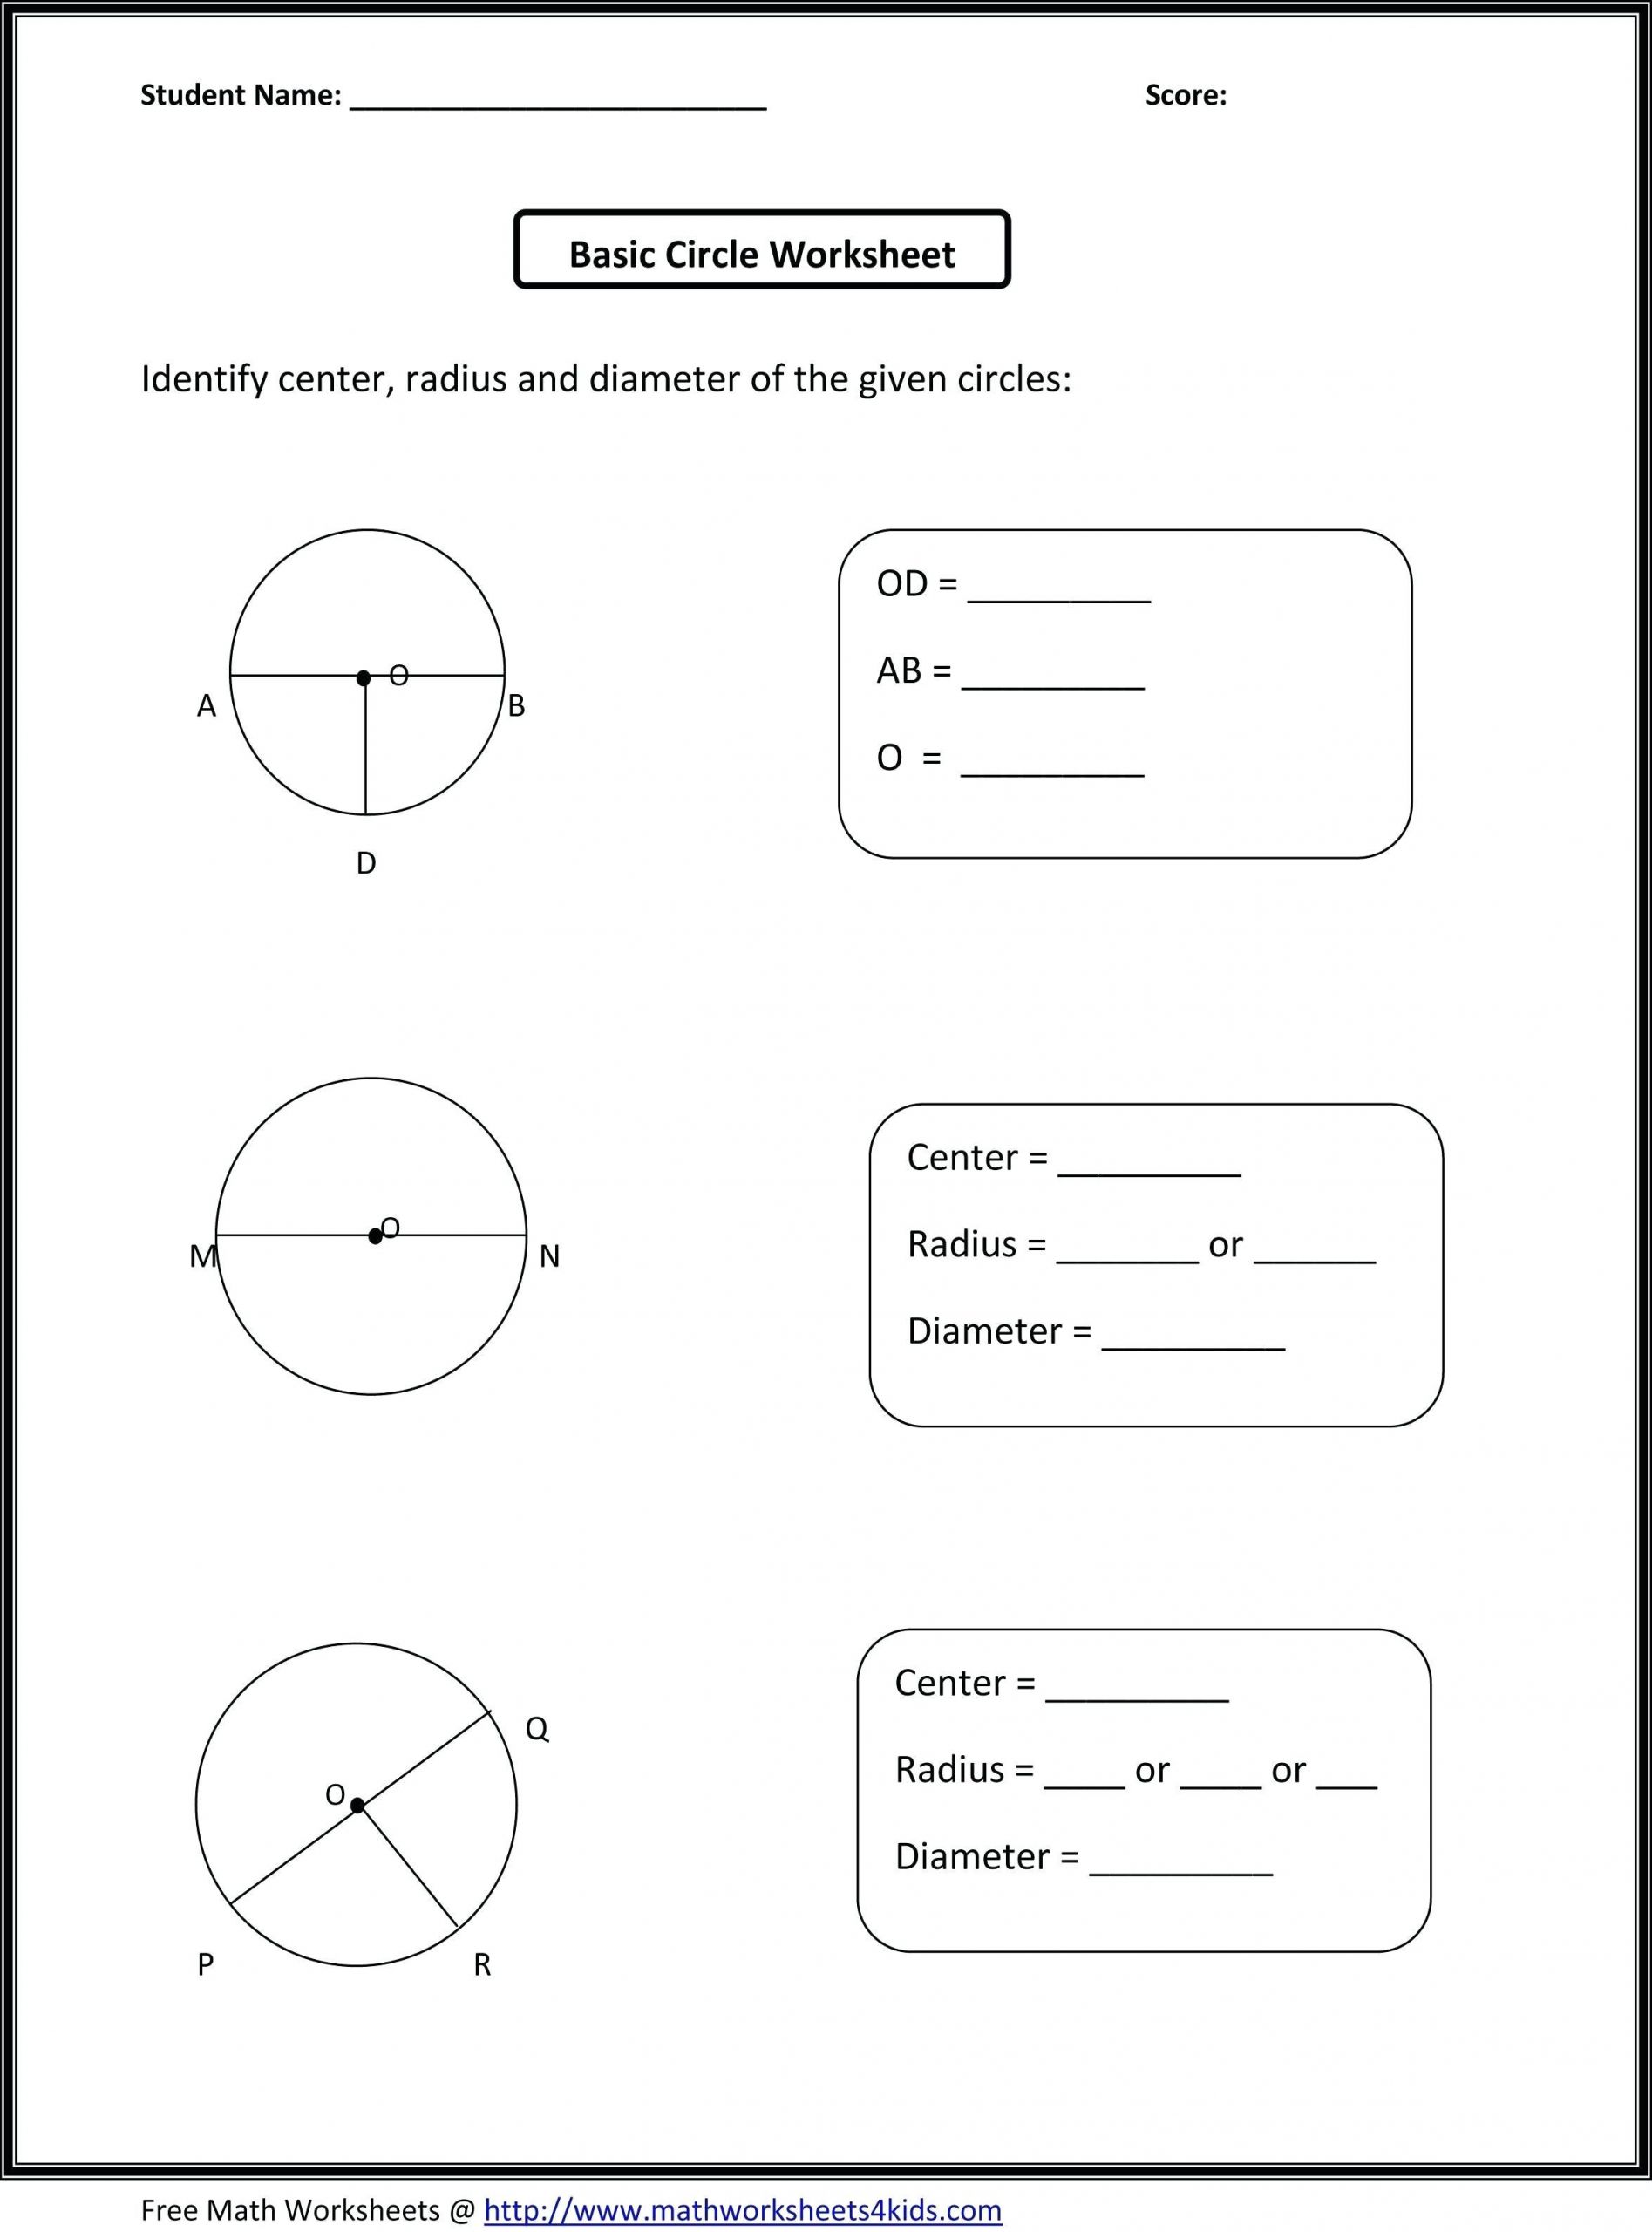 3rd grade spelling words math grade math worksheets word problems new math worksheets inspiration of page word 3rd grade math spelling words